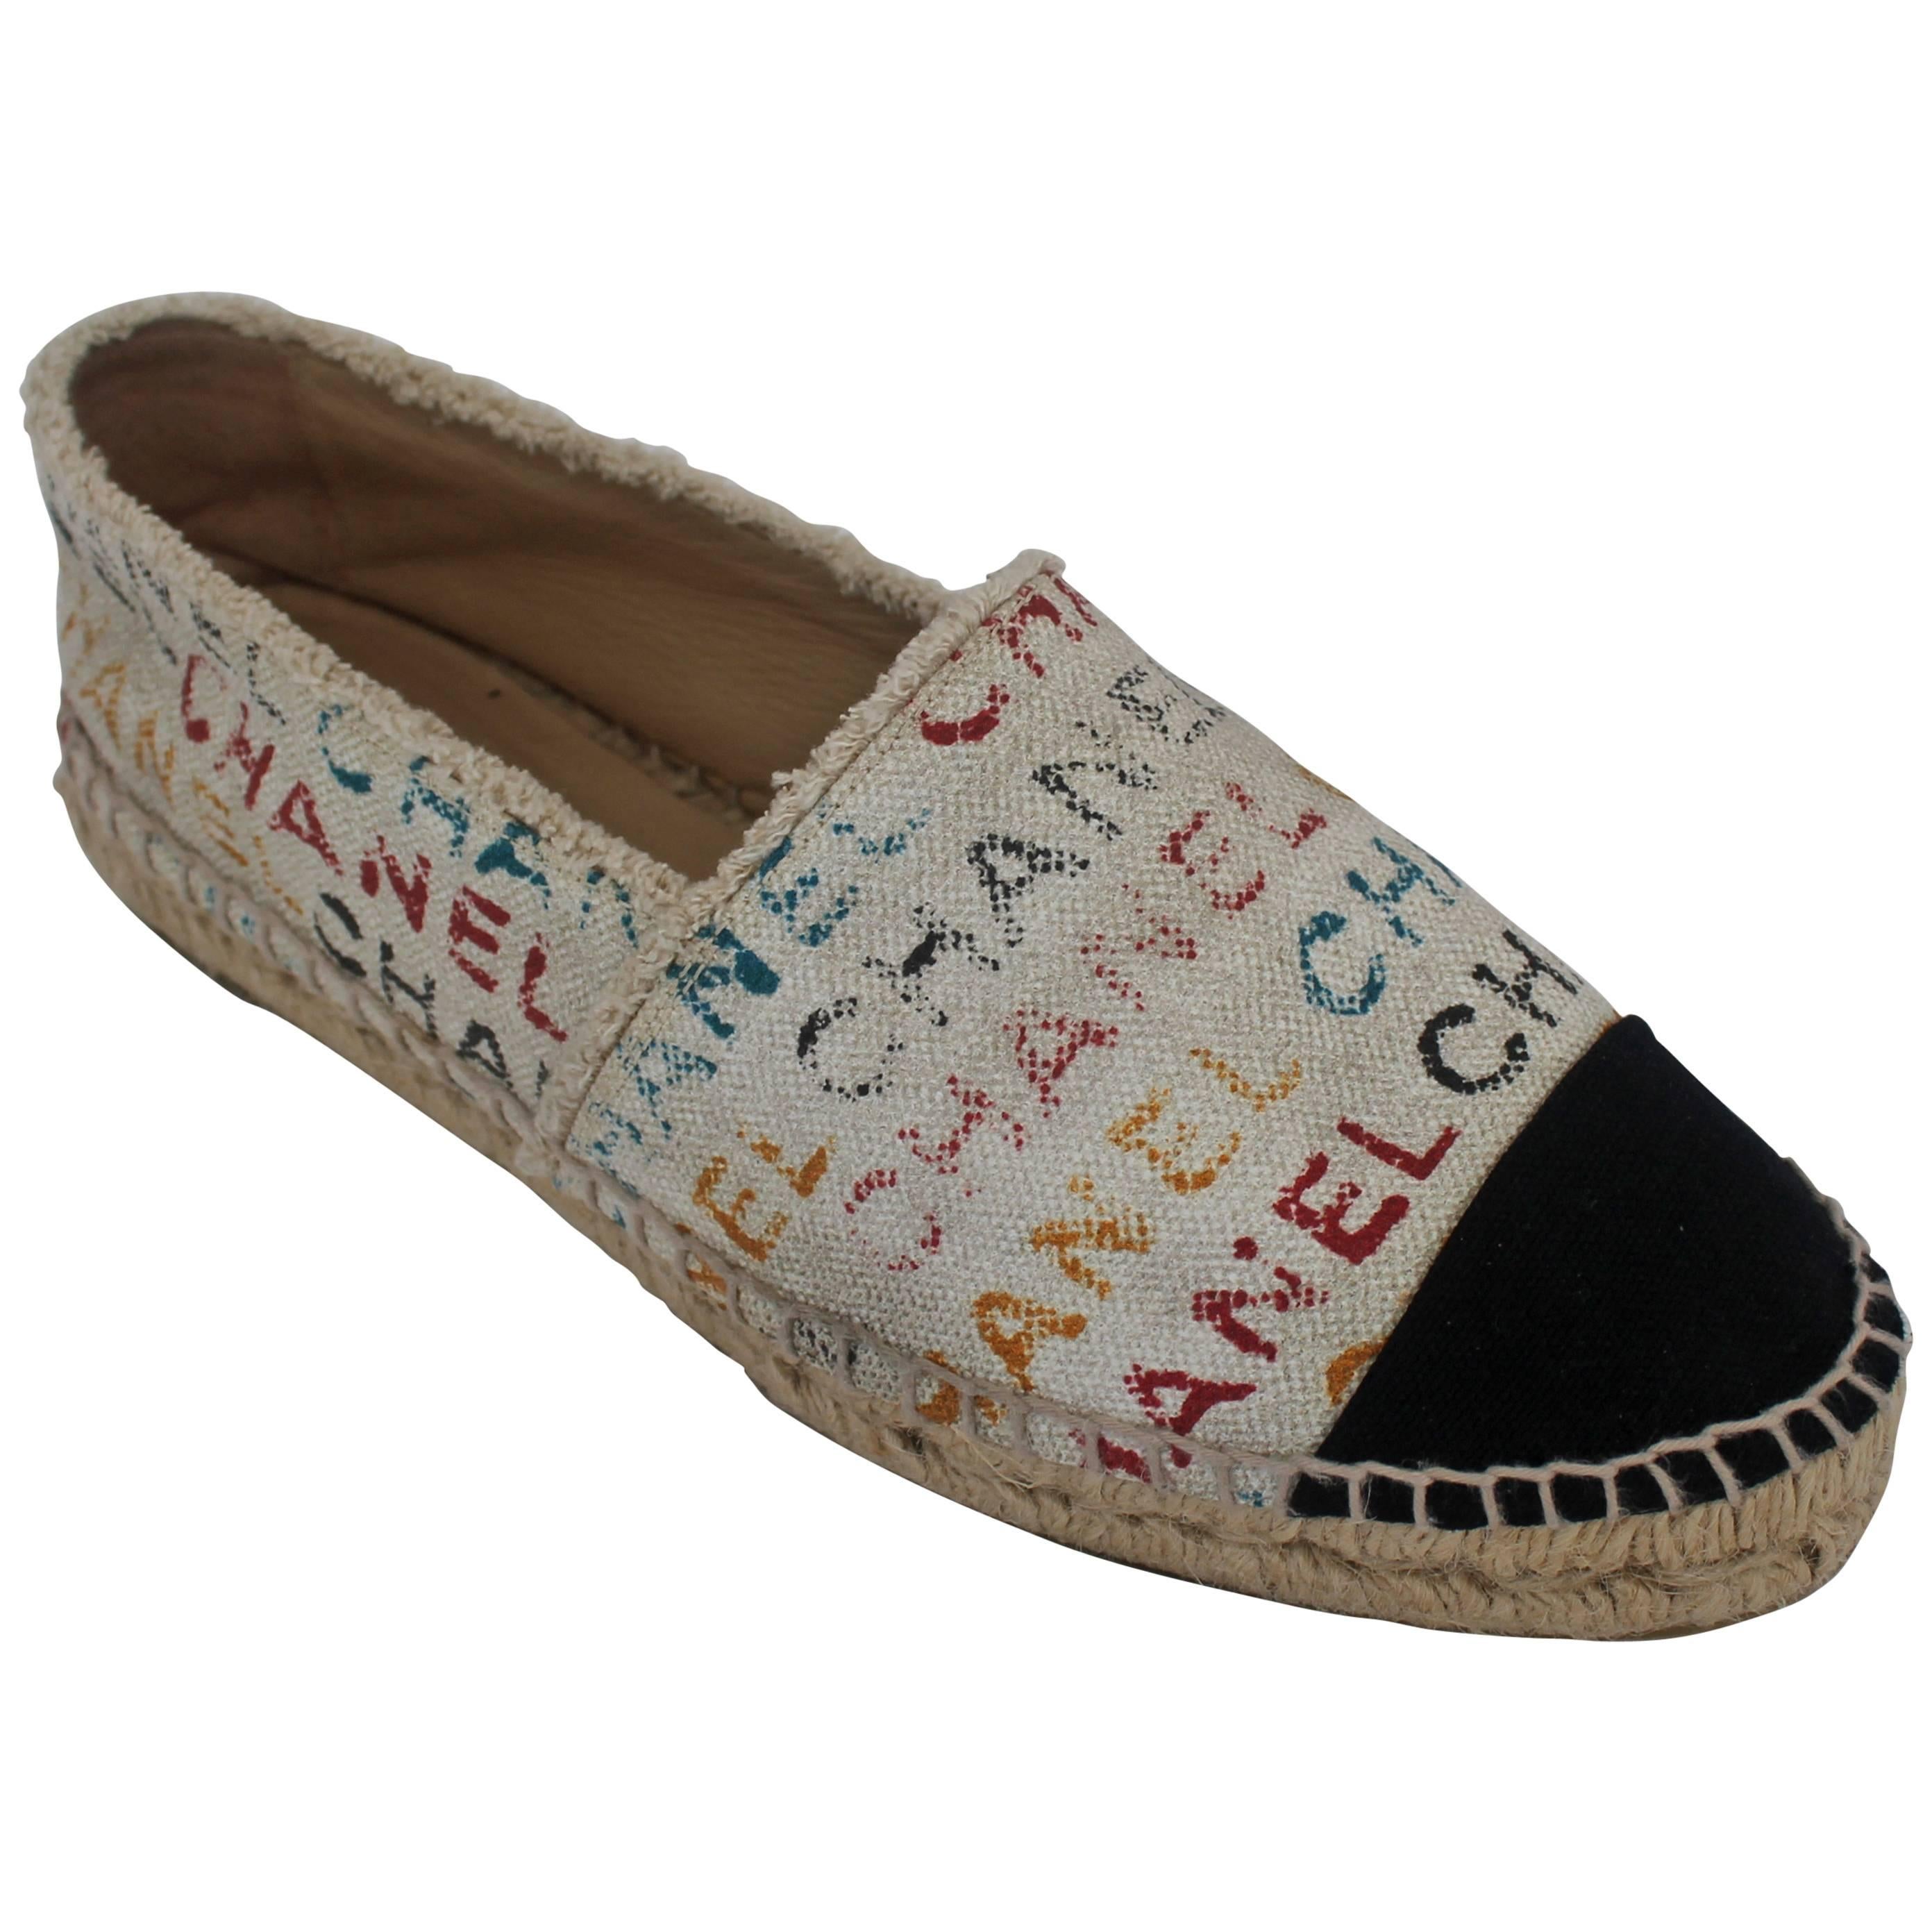 Chanel Black and Cream with Multi-Colored Print Flat Espadrilles - 41